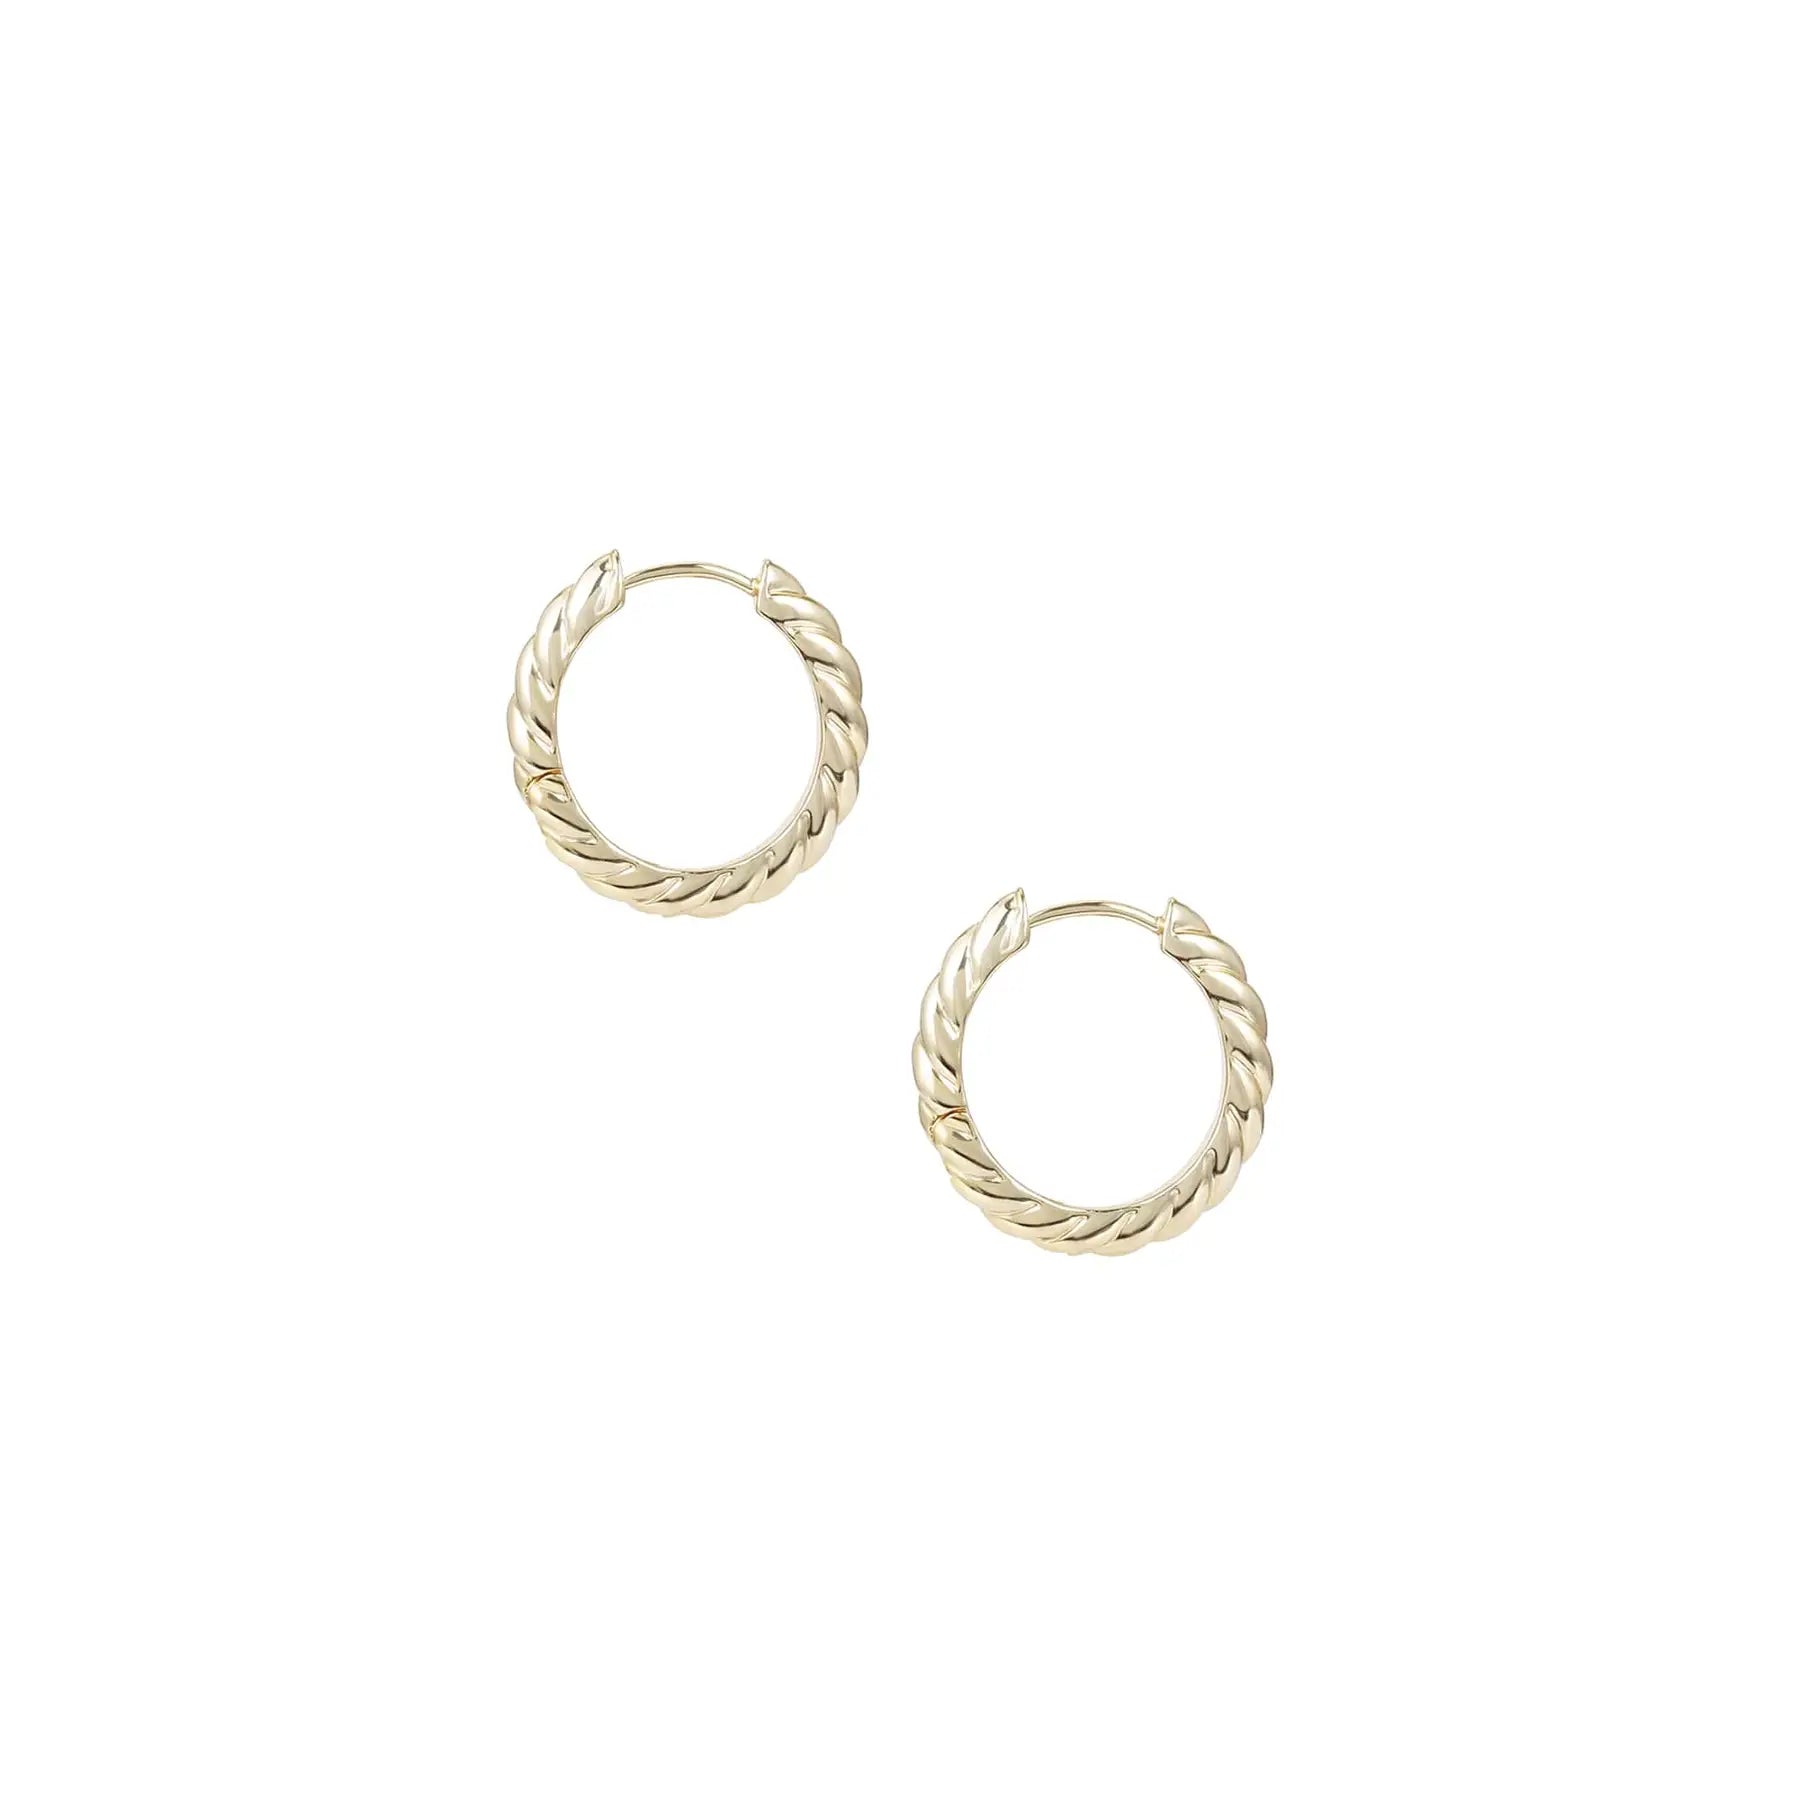 Natalie Wood - She's Spicy Huggie Earrings in Gold-110 Jewelry & Hair-Natalie Wood-July & June Women's Fashion Boutique Located in San Antonio, Texas